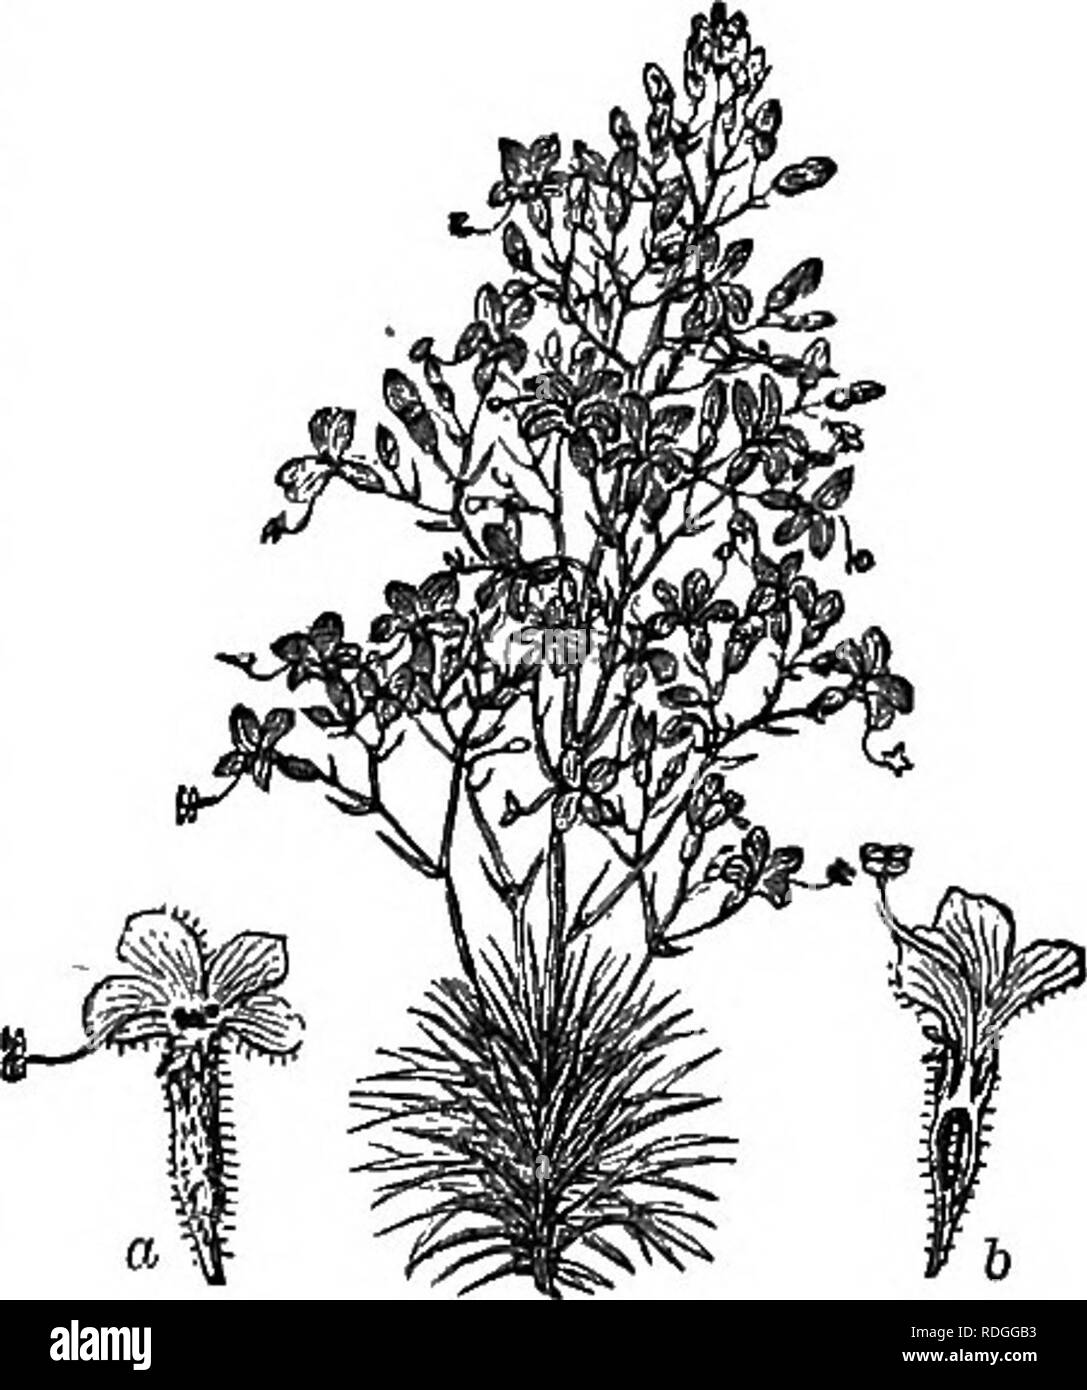 . A Manual of botany : being an introduction to the study of the structure, physiology, and classification of plants . Botany. VEGETABLE IREITABILITY. 387. P%&gt; t&gt;y means of whicli the pollen is forcibly scattered (p. 283). In Euellia anisophylla the style has a curved stigmatic apex, which gradually becomes straightened, so as to come into contact with the hairs of the corolla, upon which the pollen has been scattered; and in Mimulus and Bignonia (fig. 441, p. 249) the stigma has two expanded lobes which close when touched, a movement apparently in some way connected with fertilisation.  Stock Photo